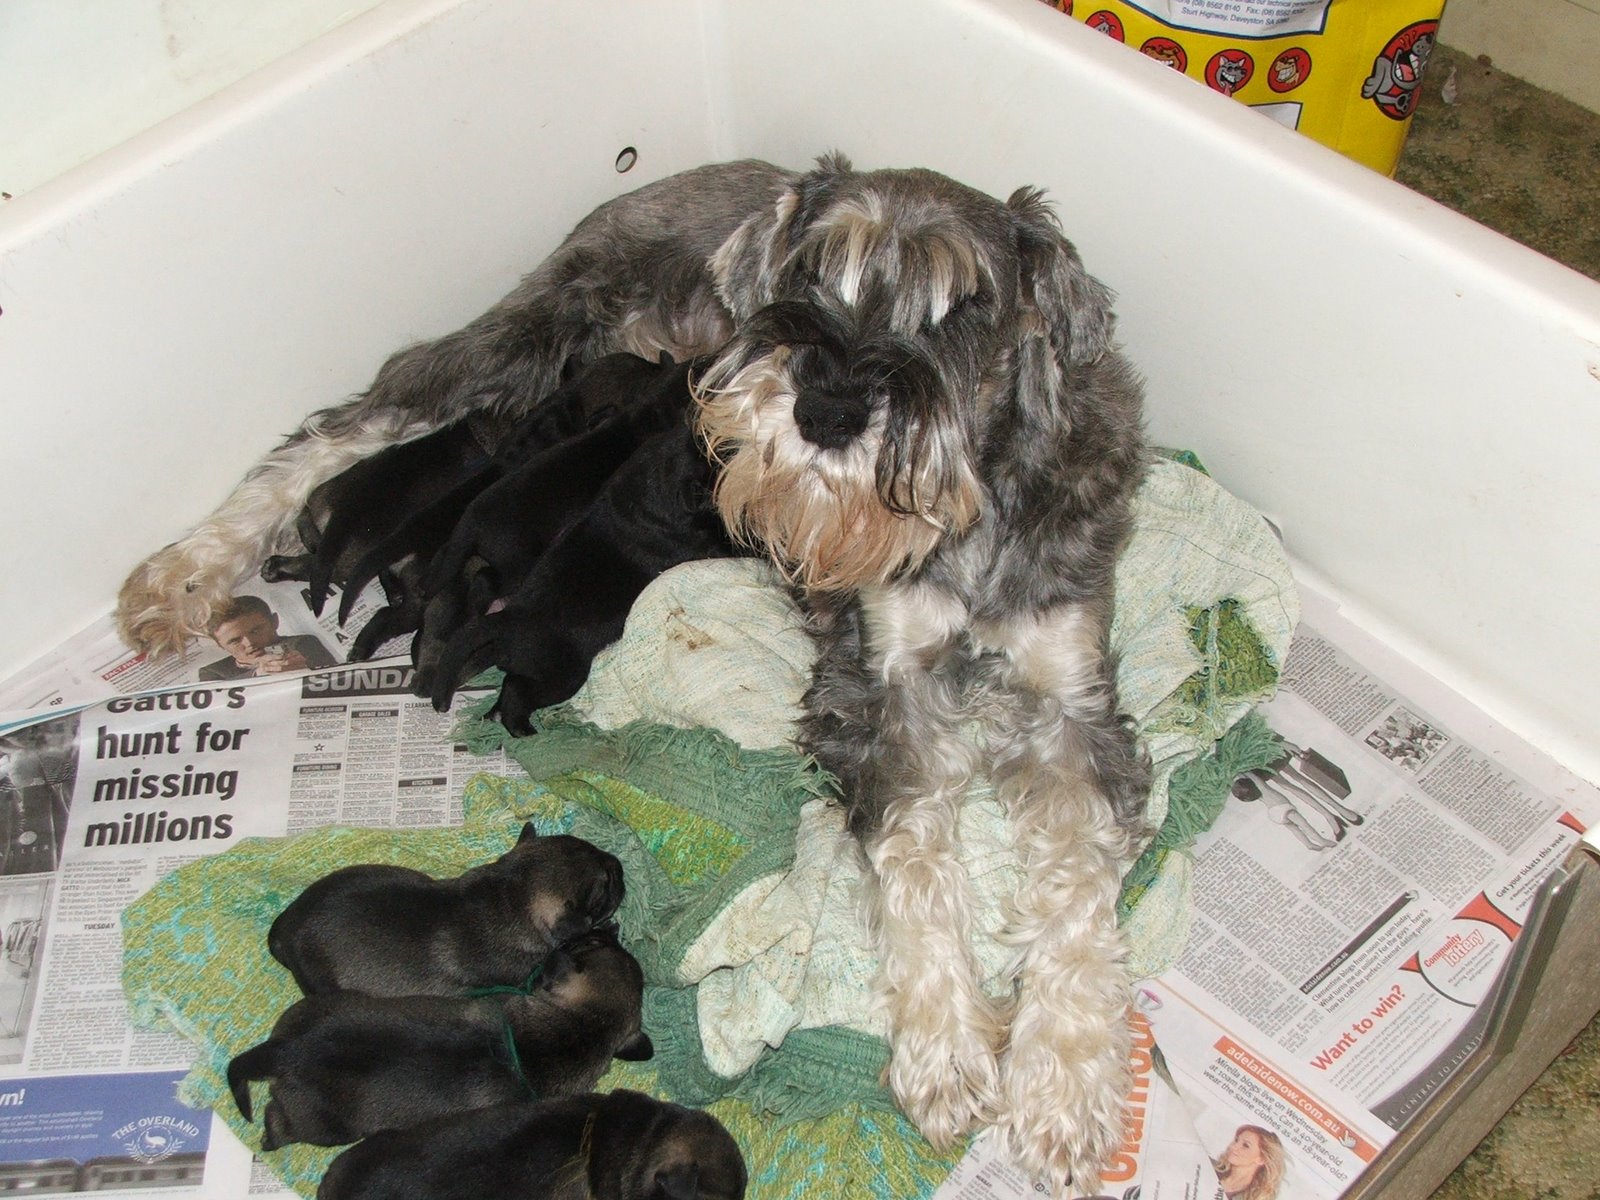 Nena and her babies